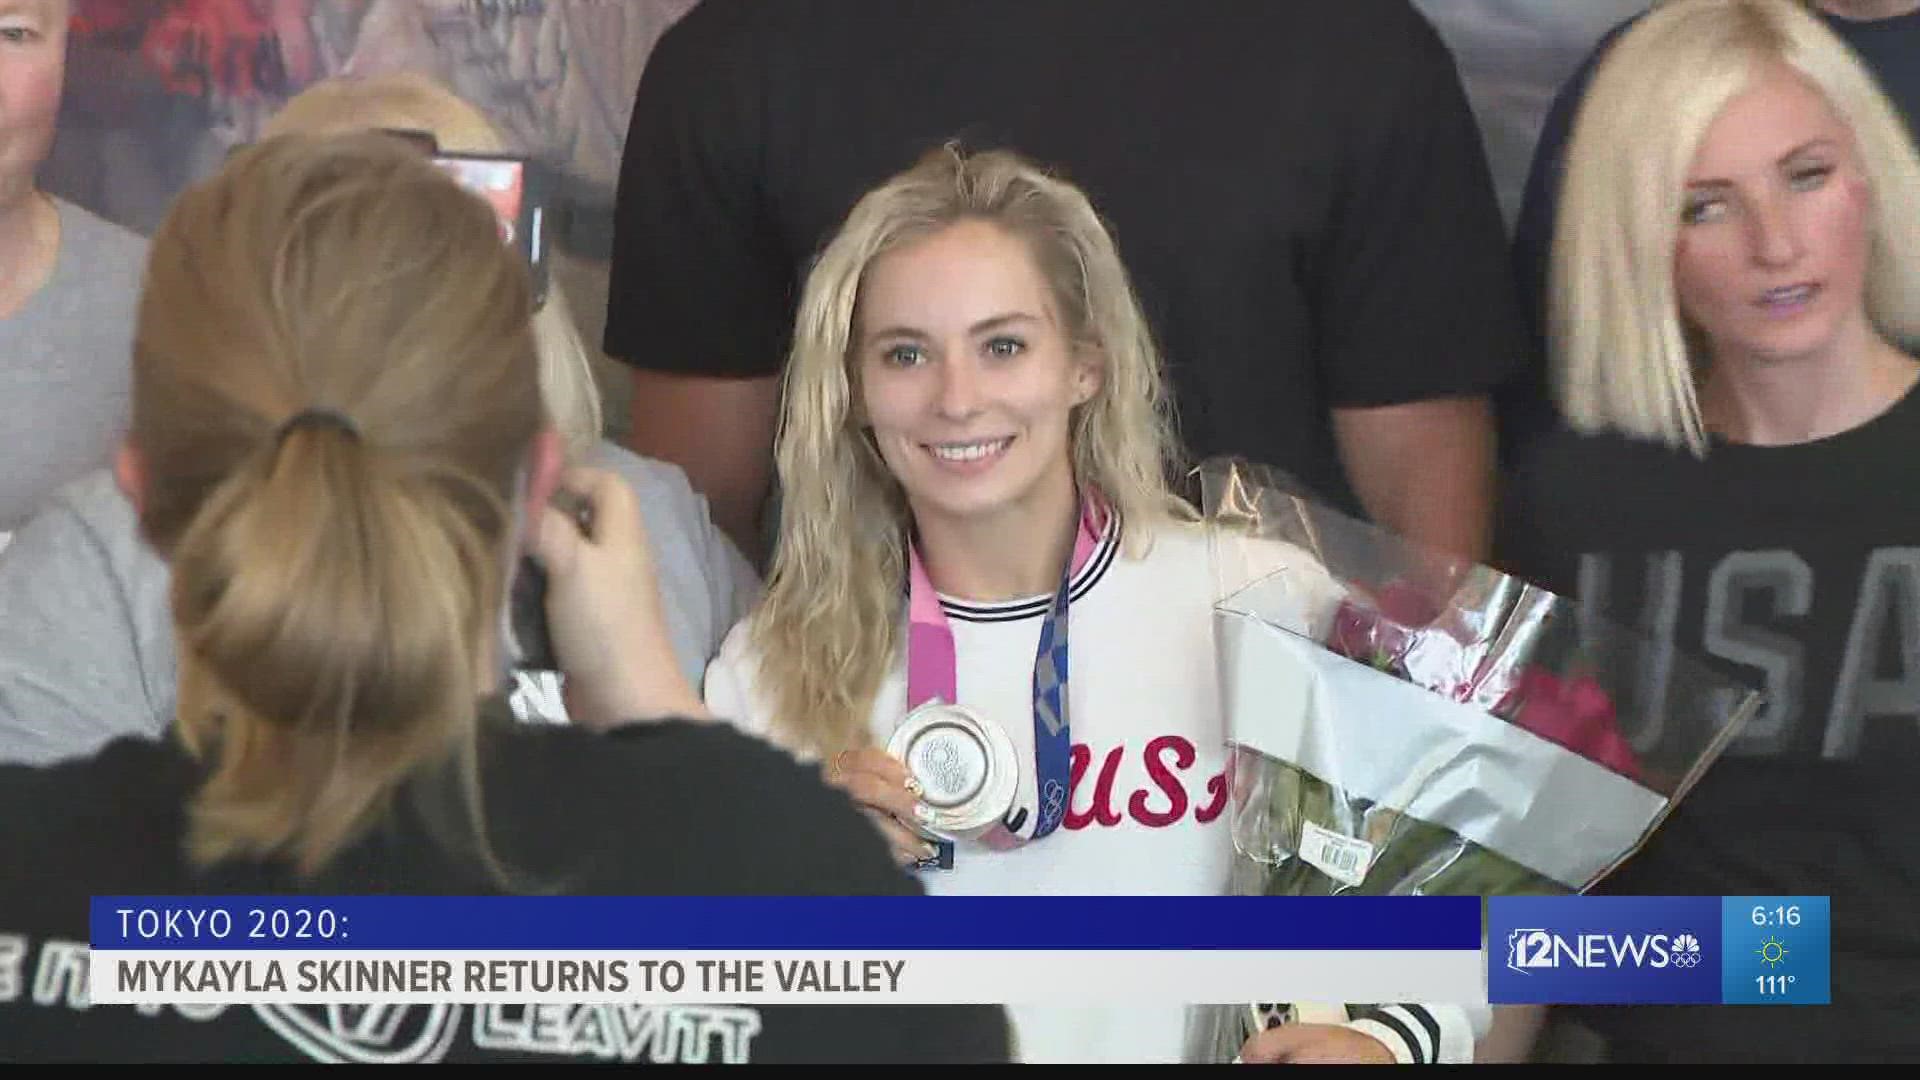 Silver medalist MyKayla Skinner is back home in the Valley! She won for her vault exercise at the Tokyo Olympics after Simone Biles stepped down.